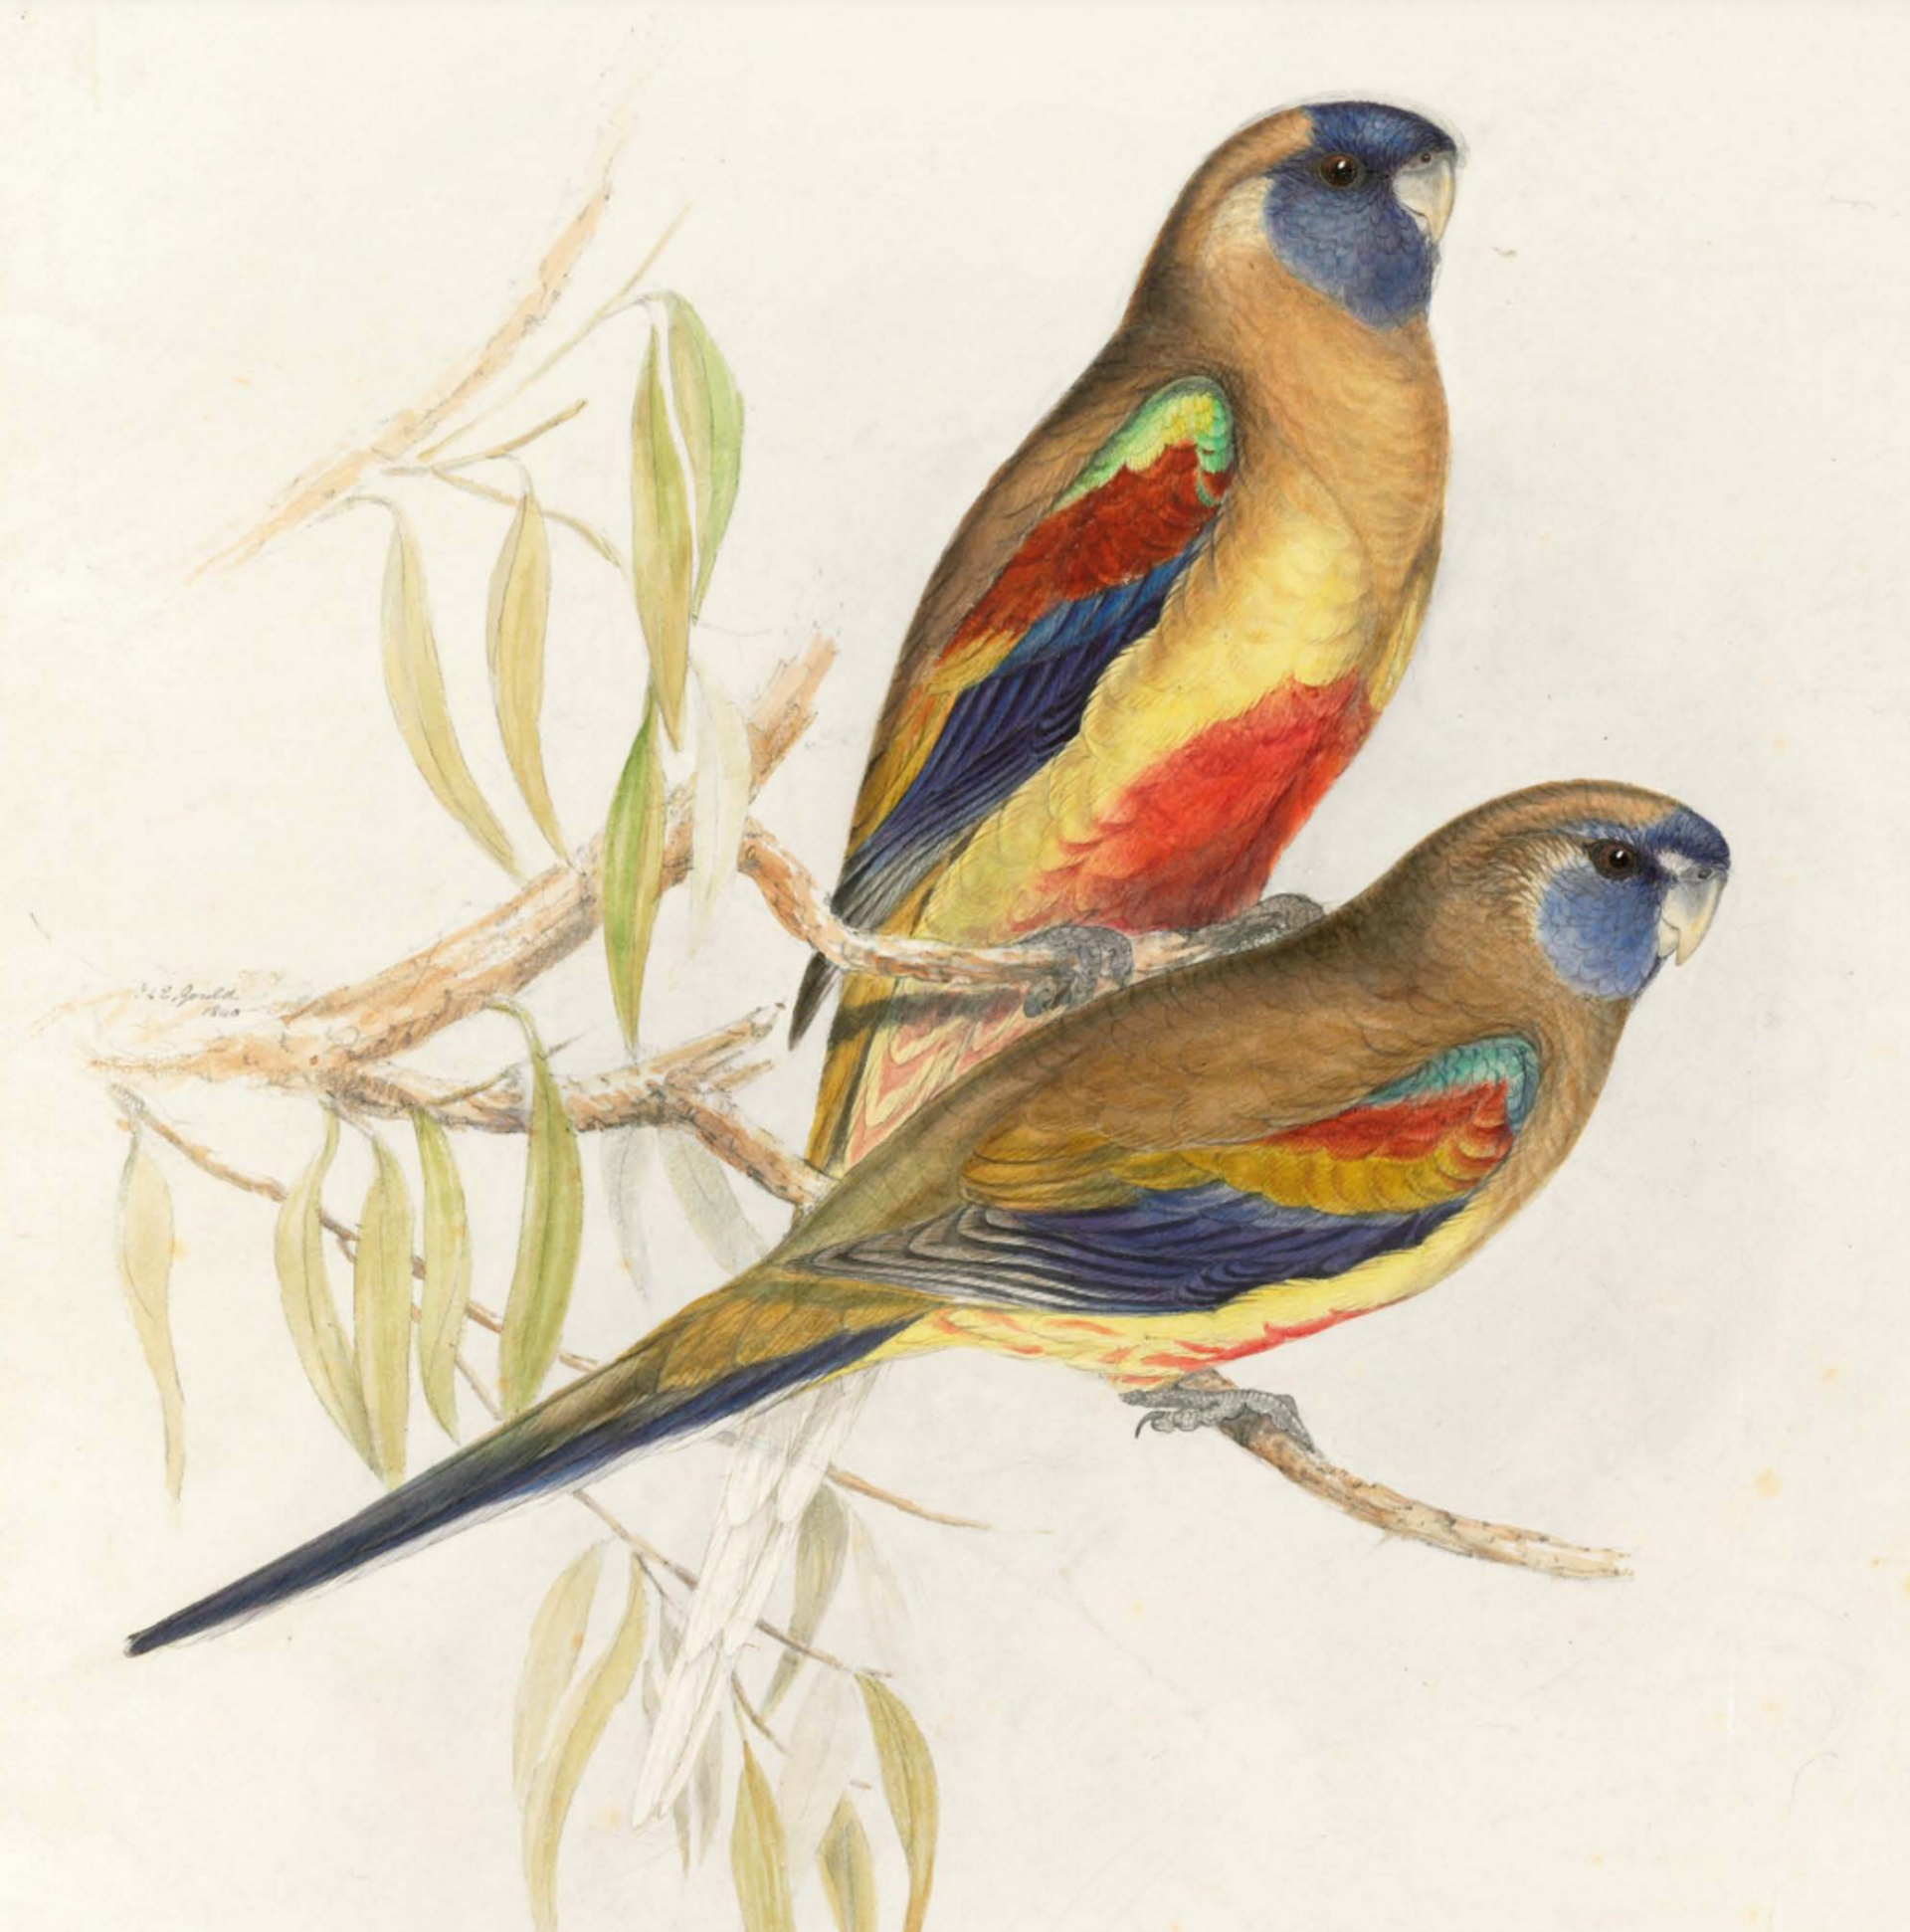 John Gould’s Original Drawings, Vols I and II (around 1840), had an export bar placed on it and was bought for £1,288,000 by a UK-based individual who lent them to London’s Natural History Museum Photo courtesy of the Arts Council